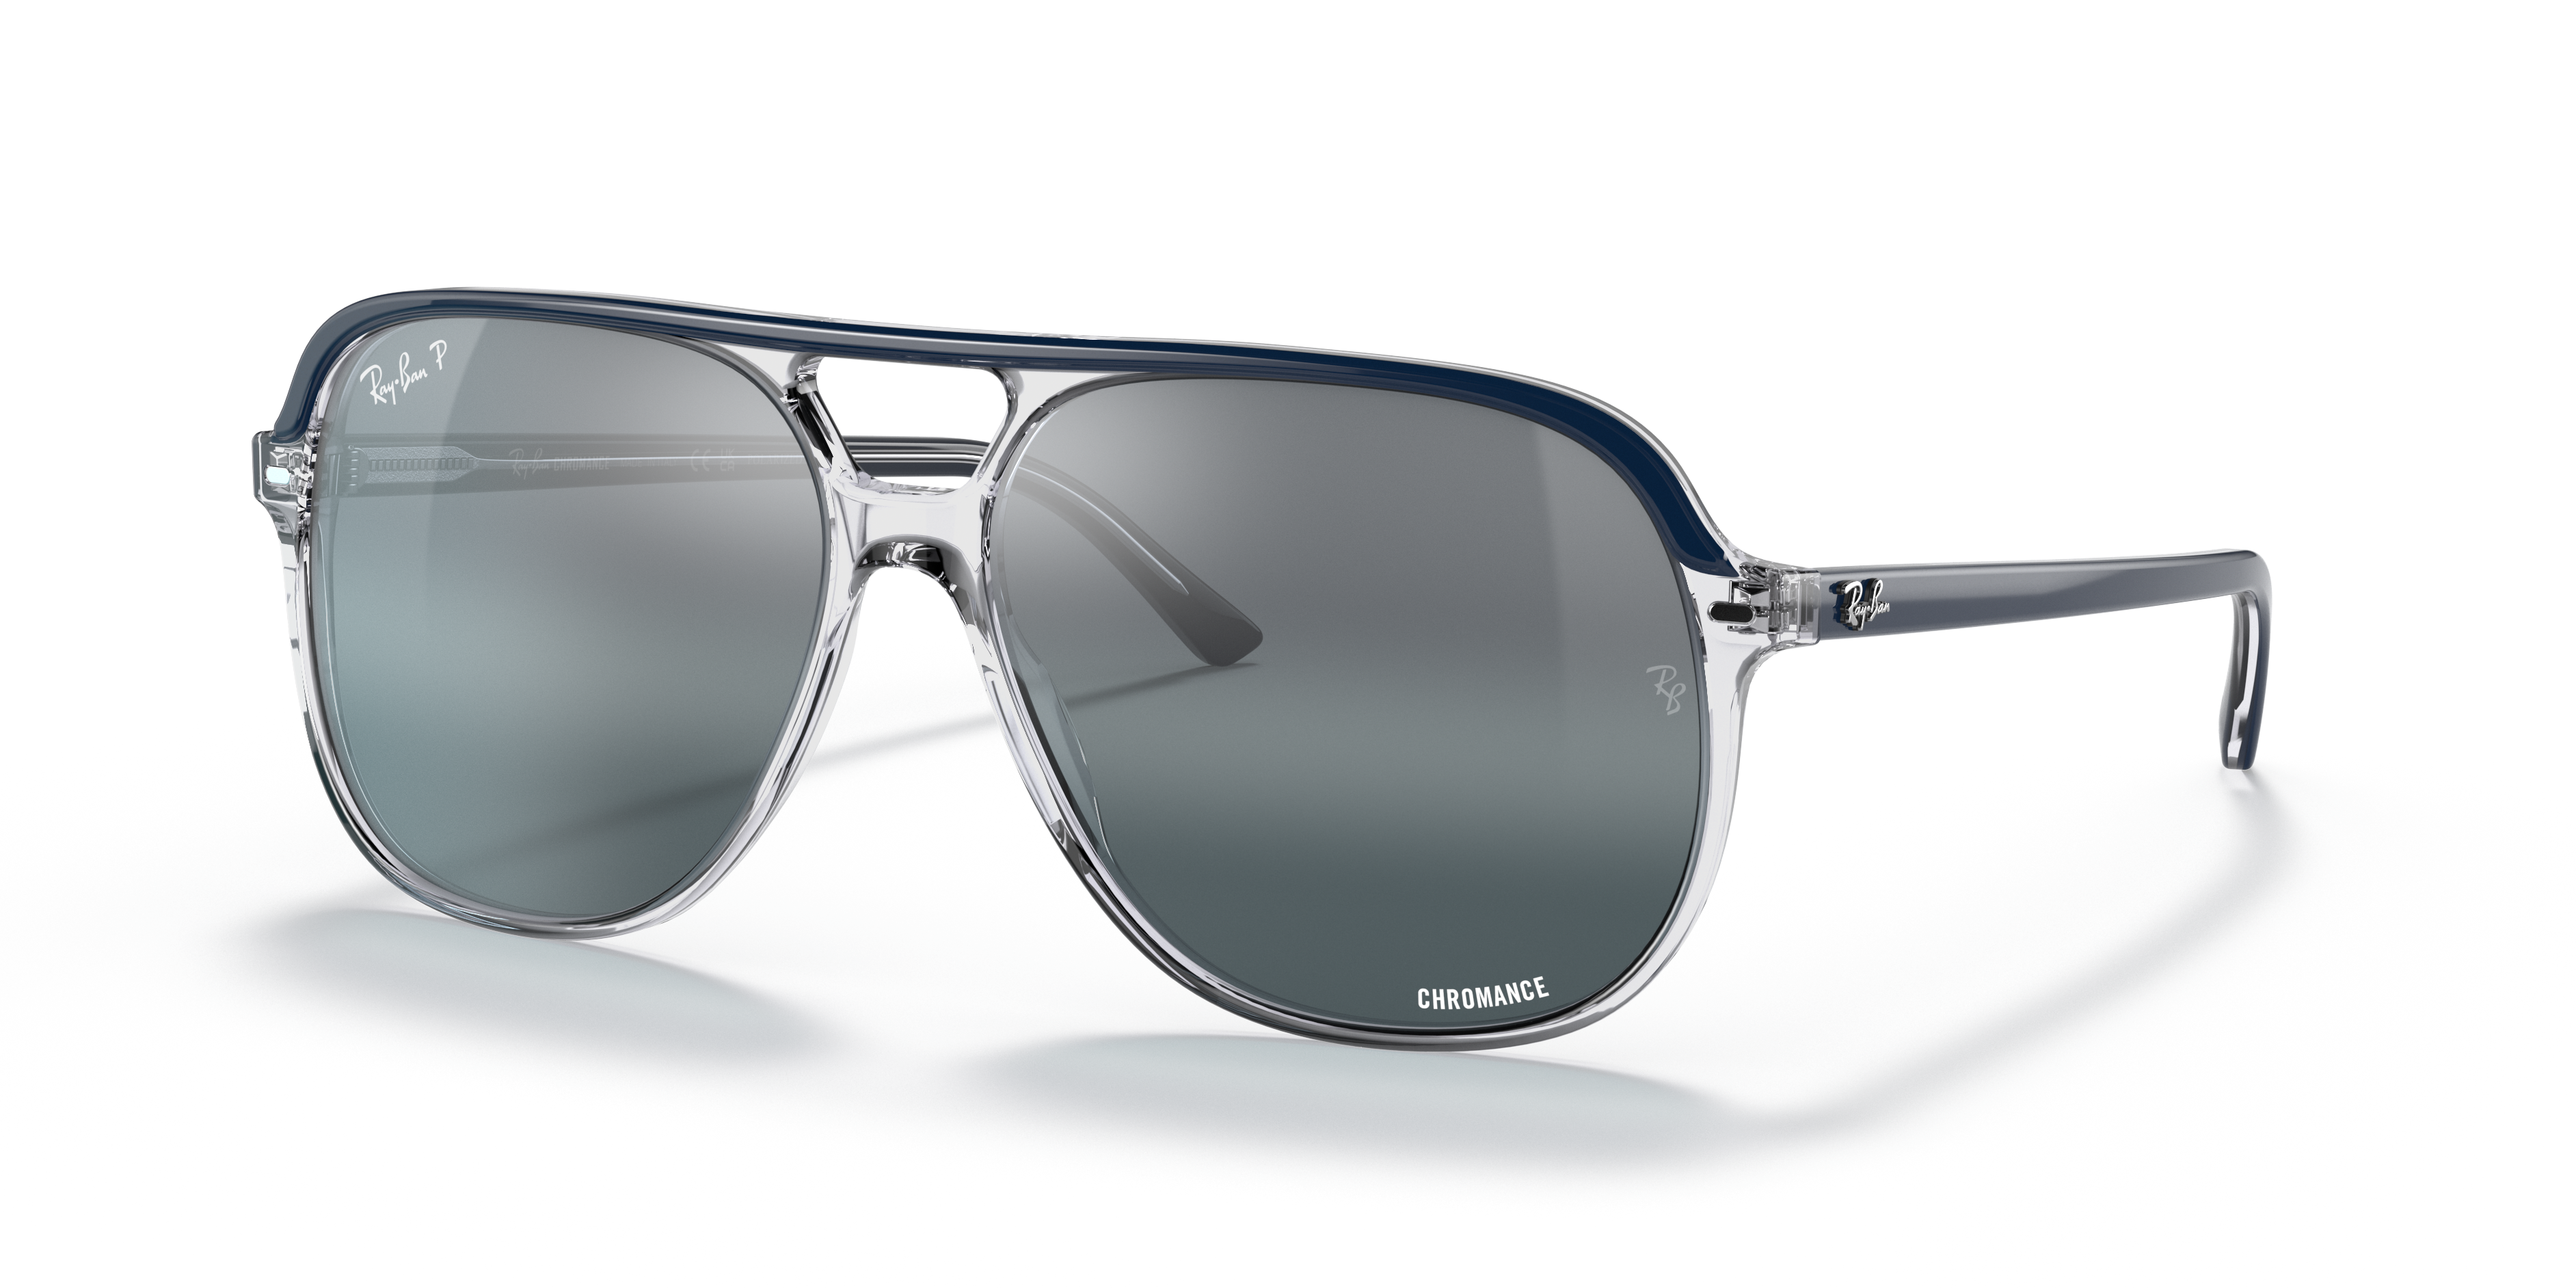 EXCLUSIVE: Sunglass Hut Debuts The Sun Club, Its First Loyalty Program